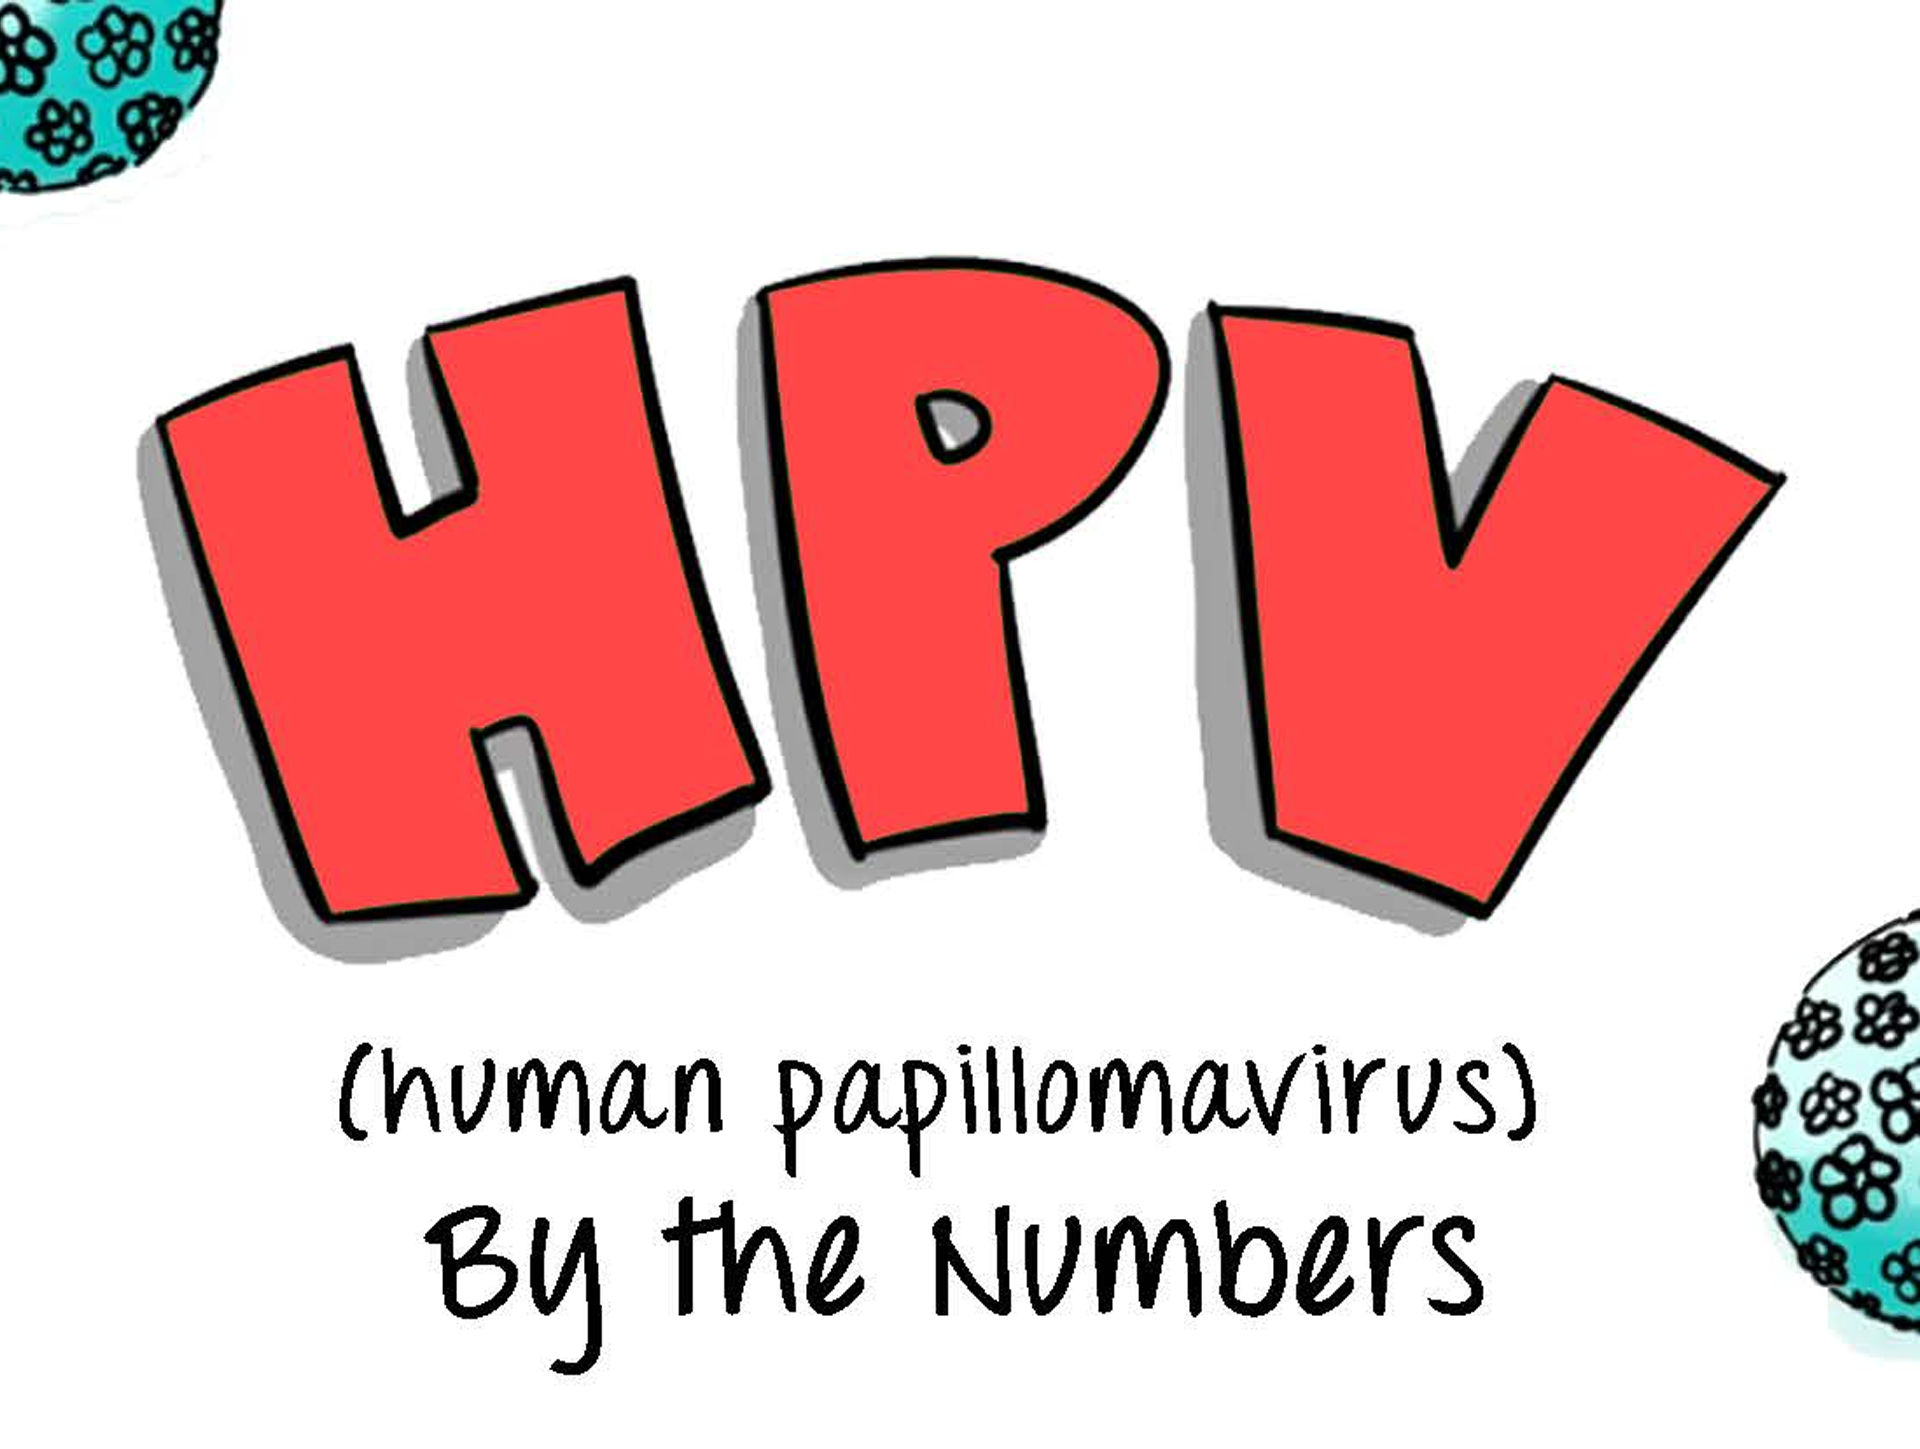 HPV Prevention – Western UP Health Department